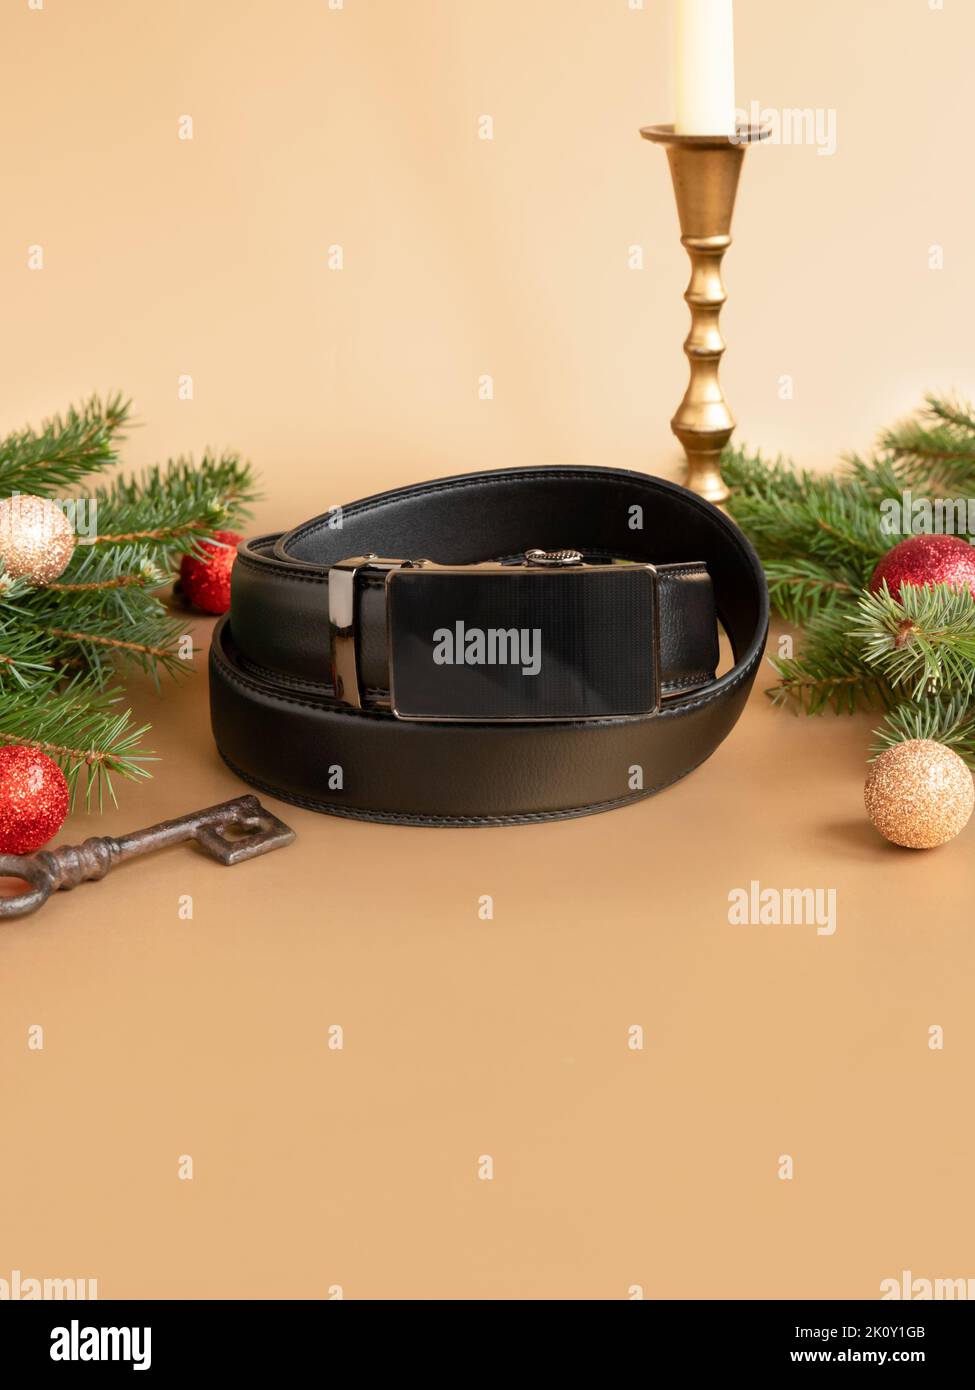 Rolled-up black fashionable men's leather belt with automatic buckle, Christmas fir tree, shiny balls, gold candlestick and key on golden background. Stock Photo